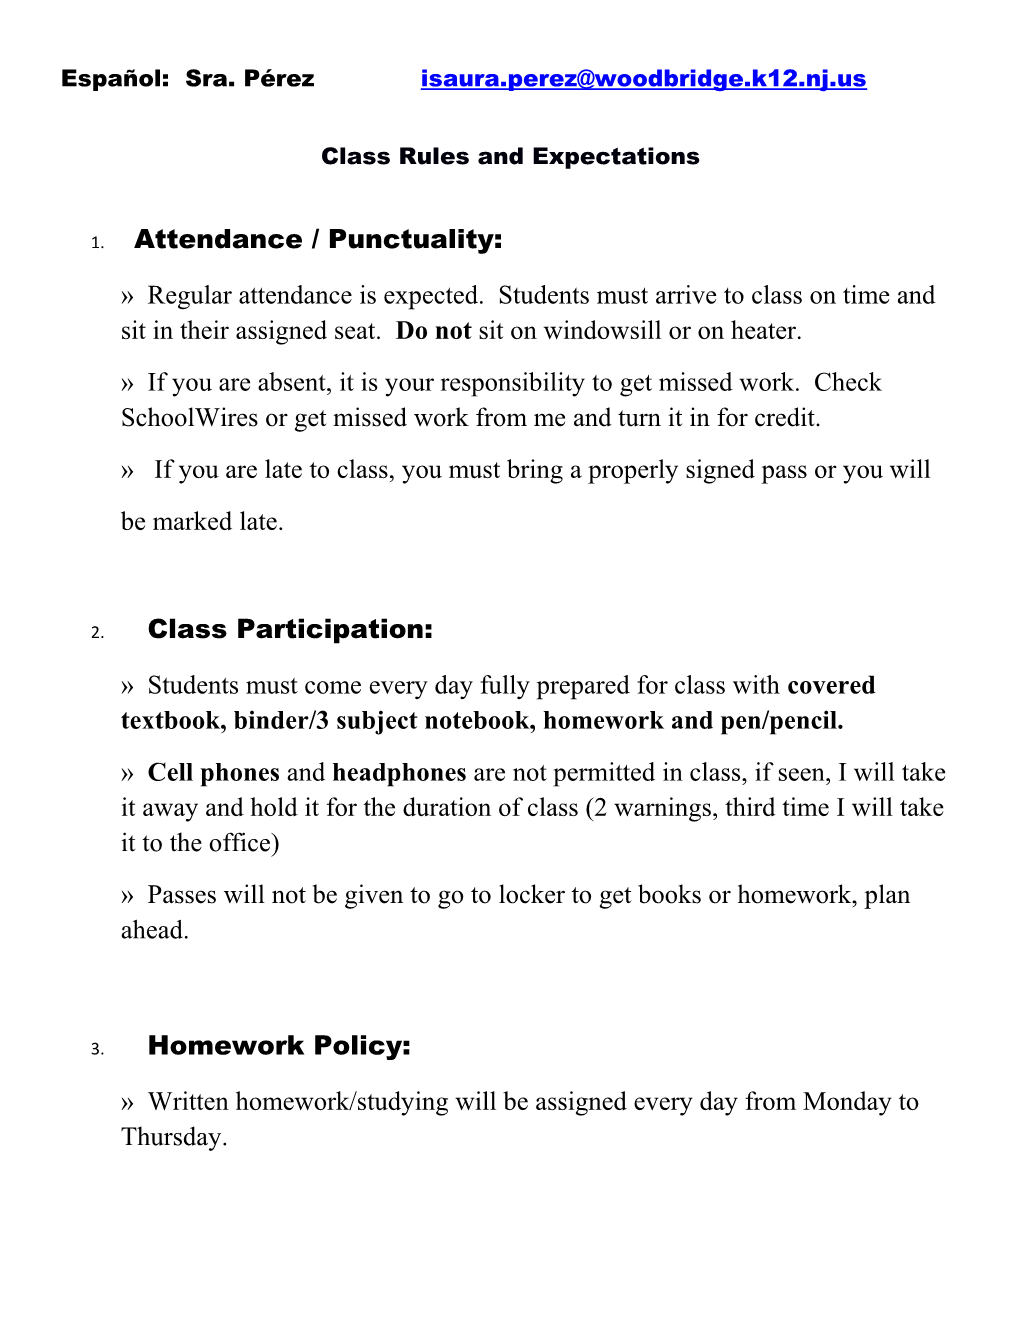 Class Rules and Expectations